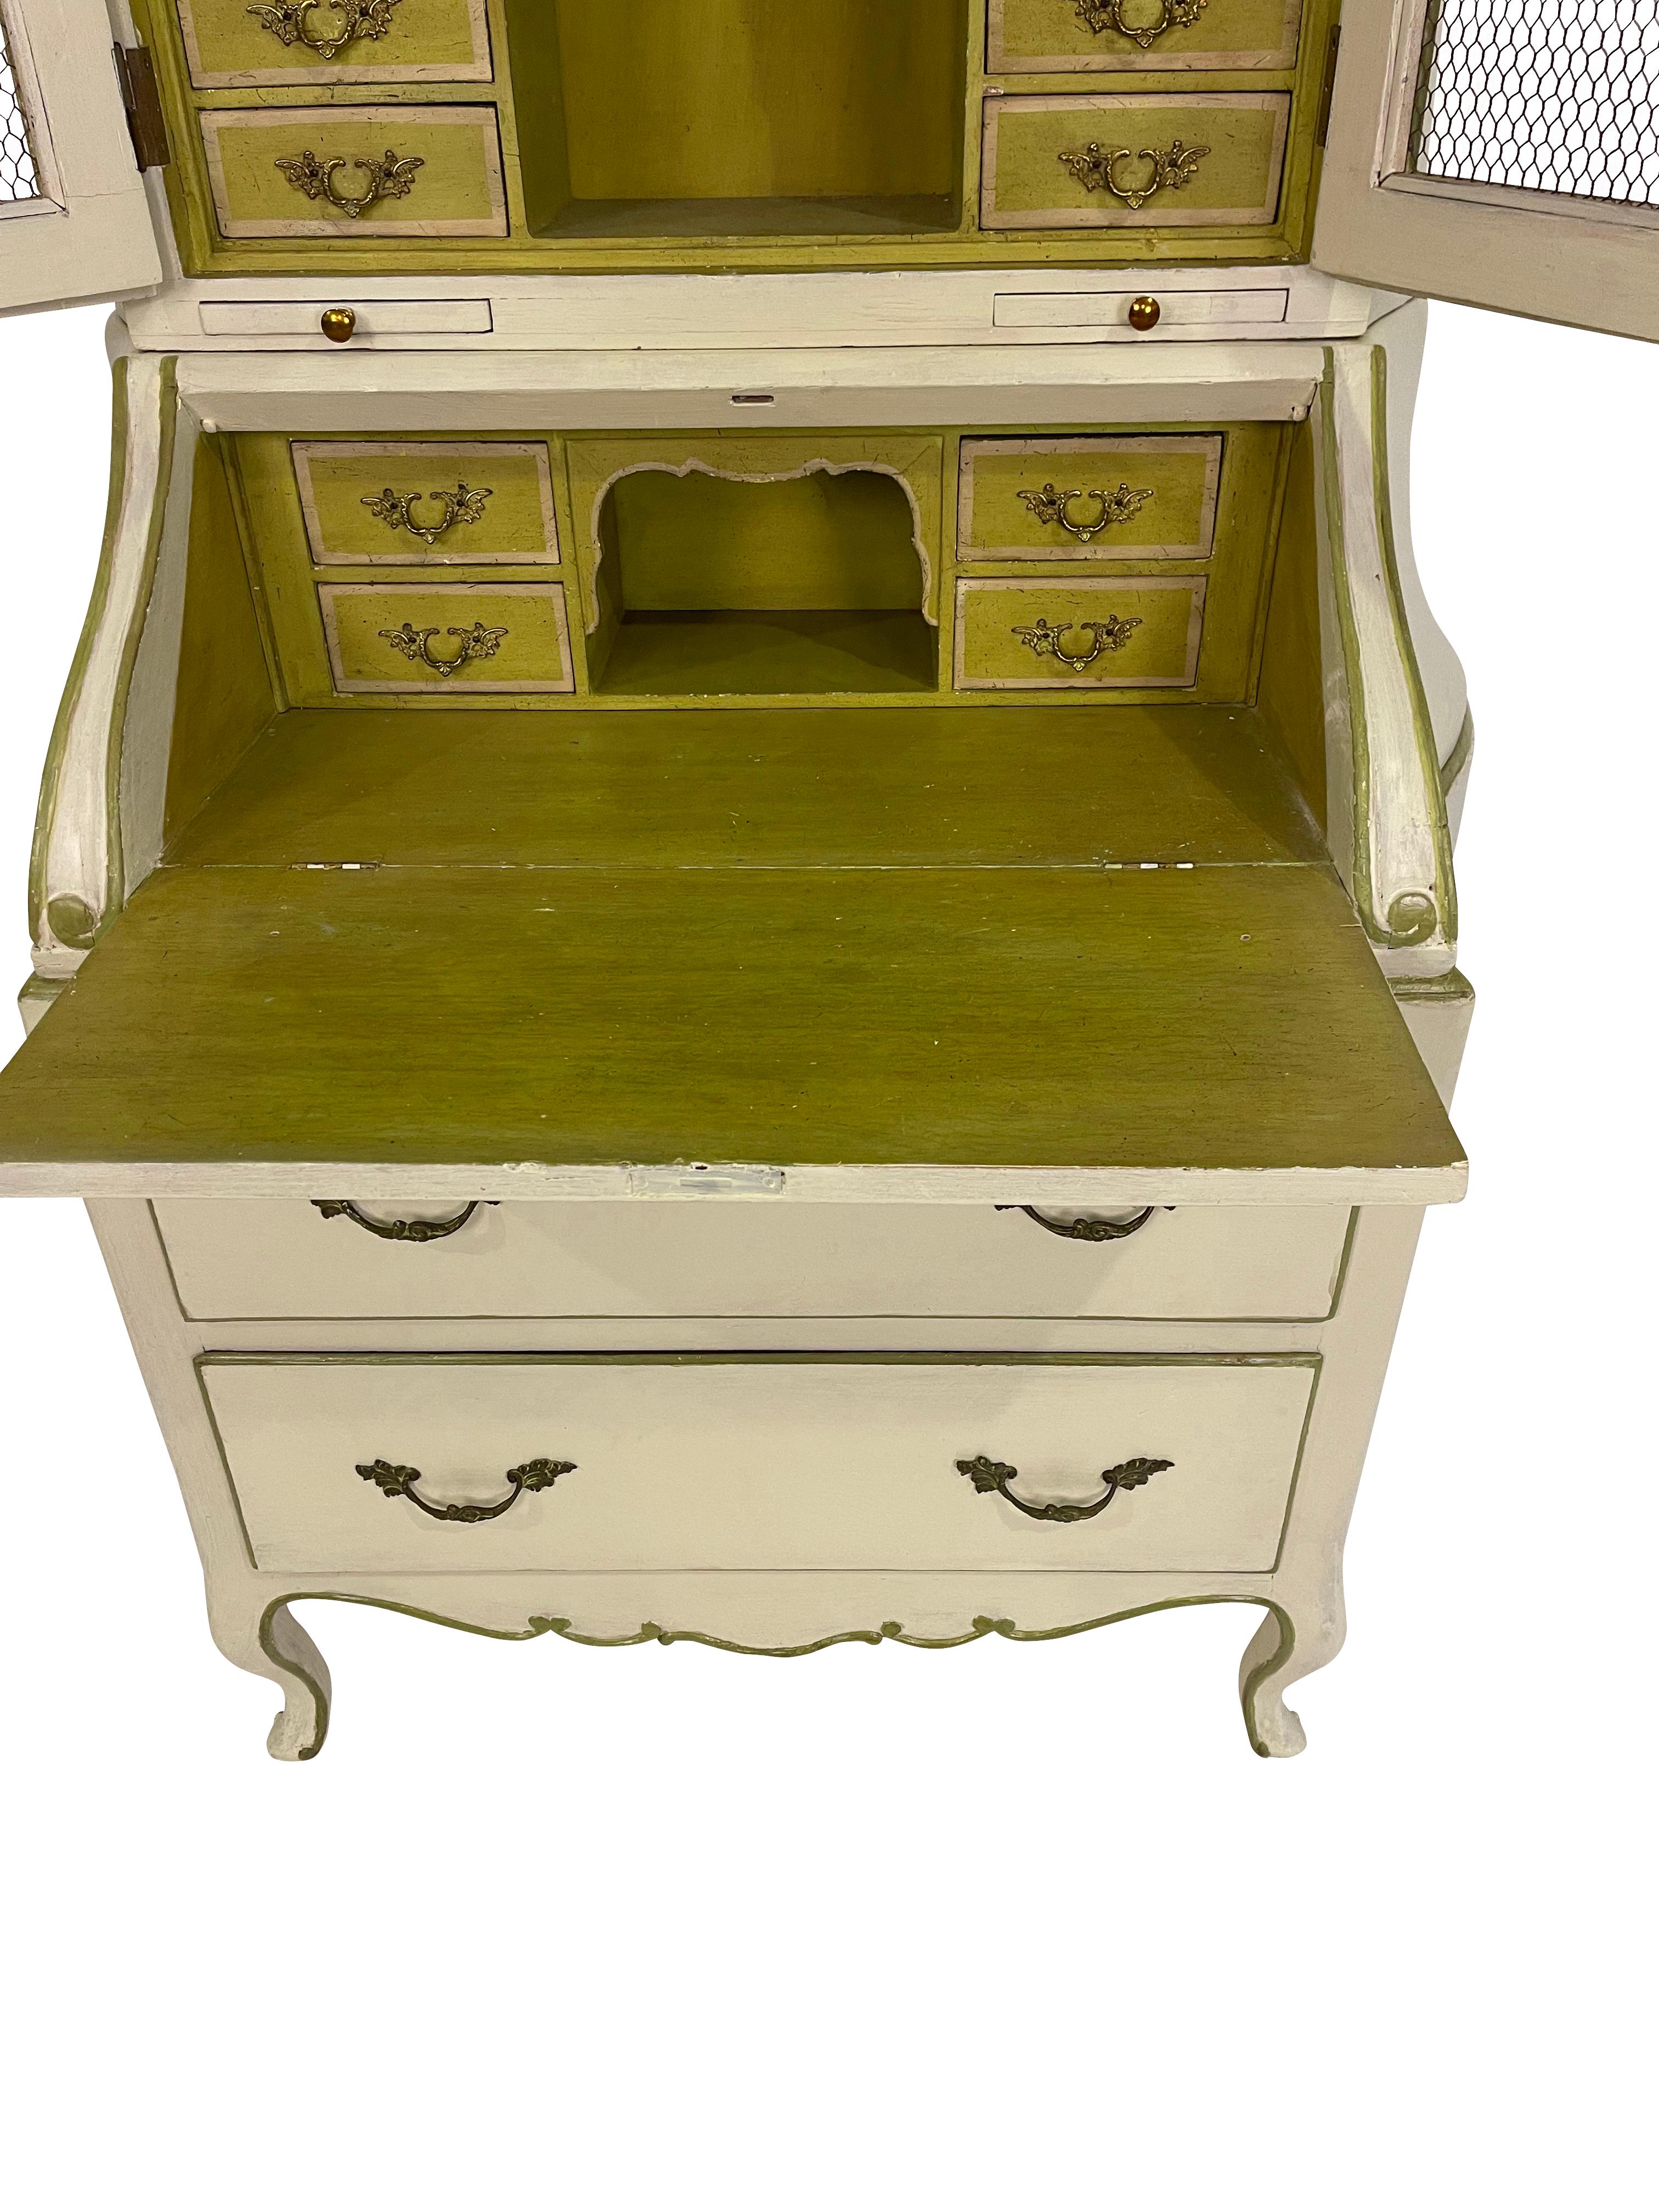 Wood Painted French Provincial Ivory and Green circa 1920s Secretary/ Desk For Sale